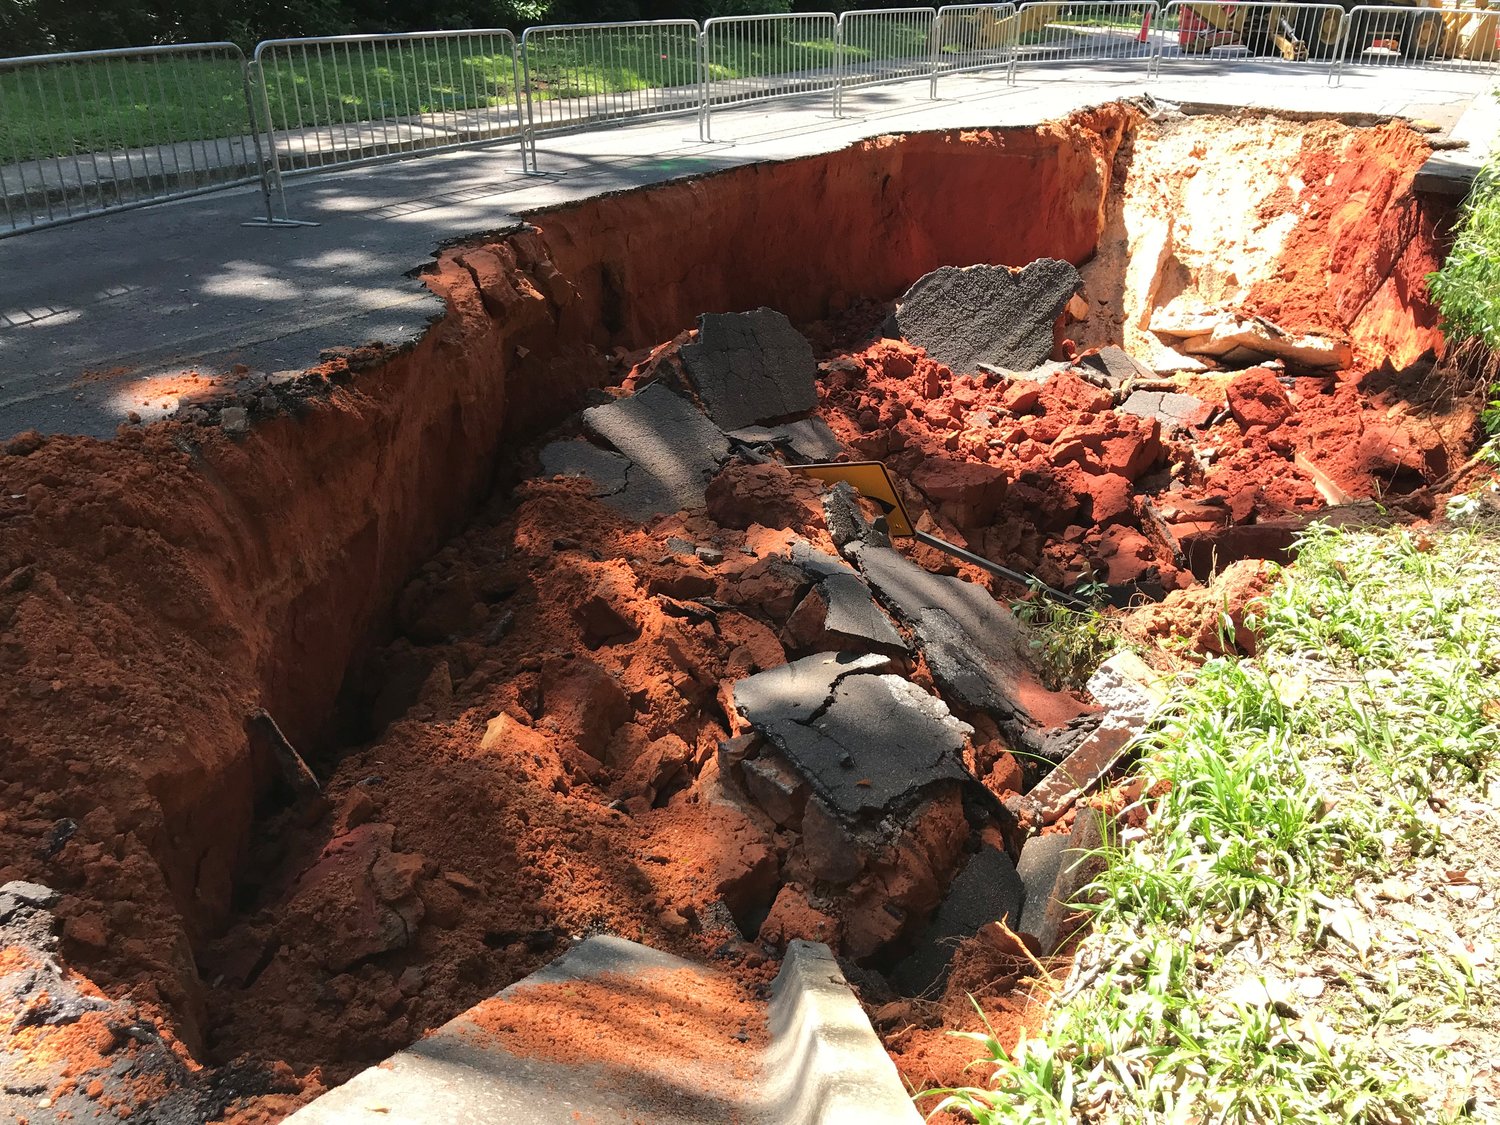 Portions of Bancroft Street collapsed Thursday morning when a sinkhole 85 feet long and 13 feet deep appeared on the street between the Eastern Shore Arts Center and Fairhope West Elementary School.